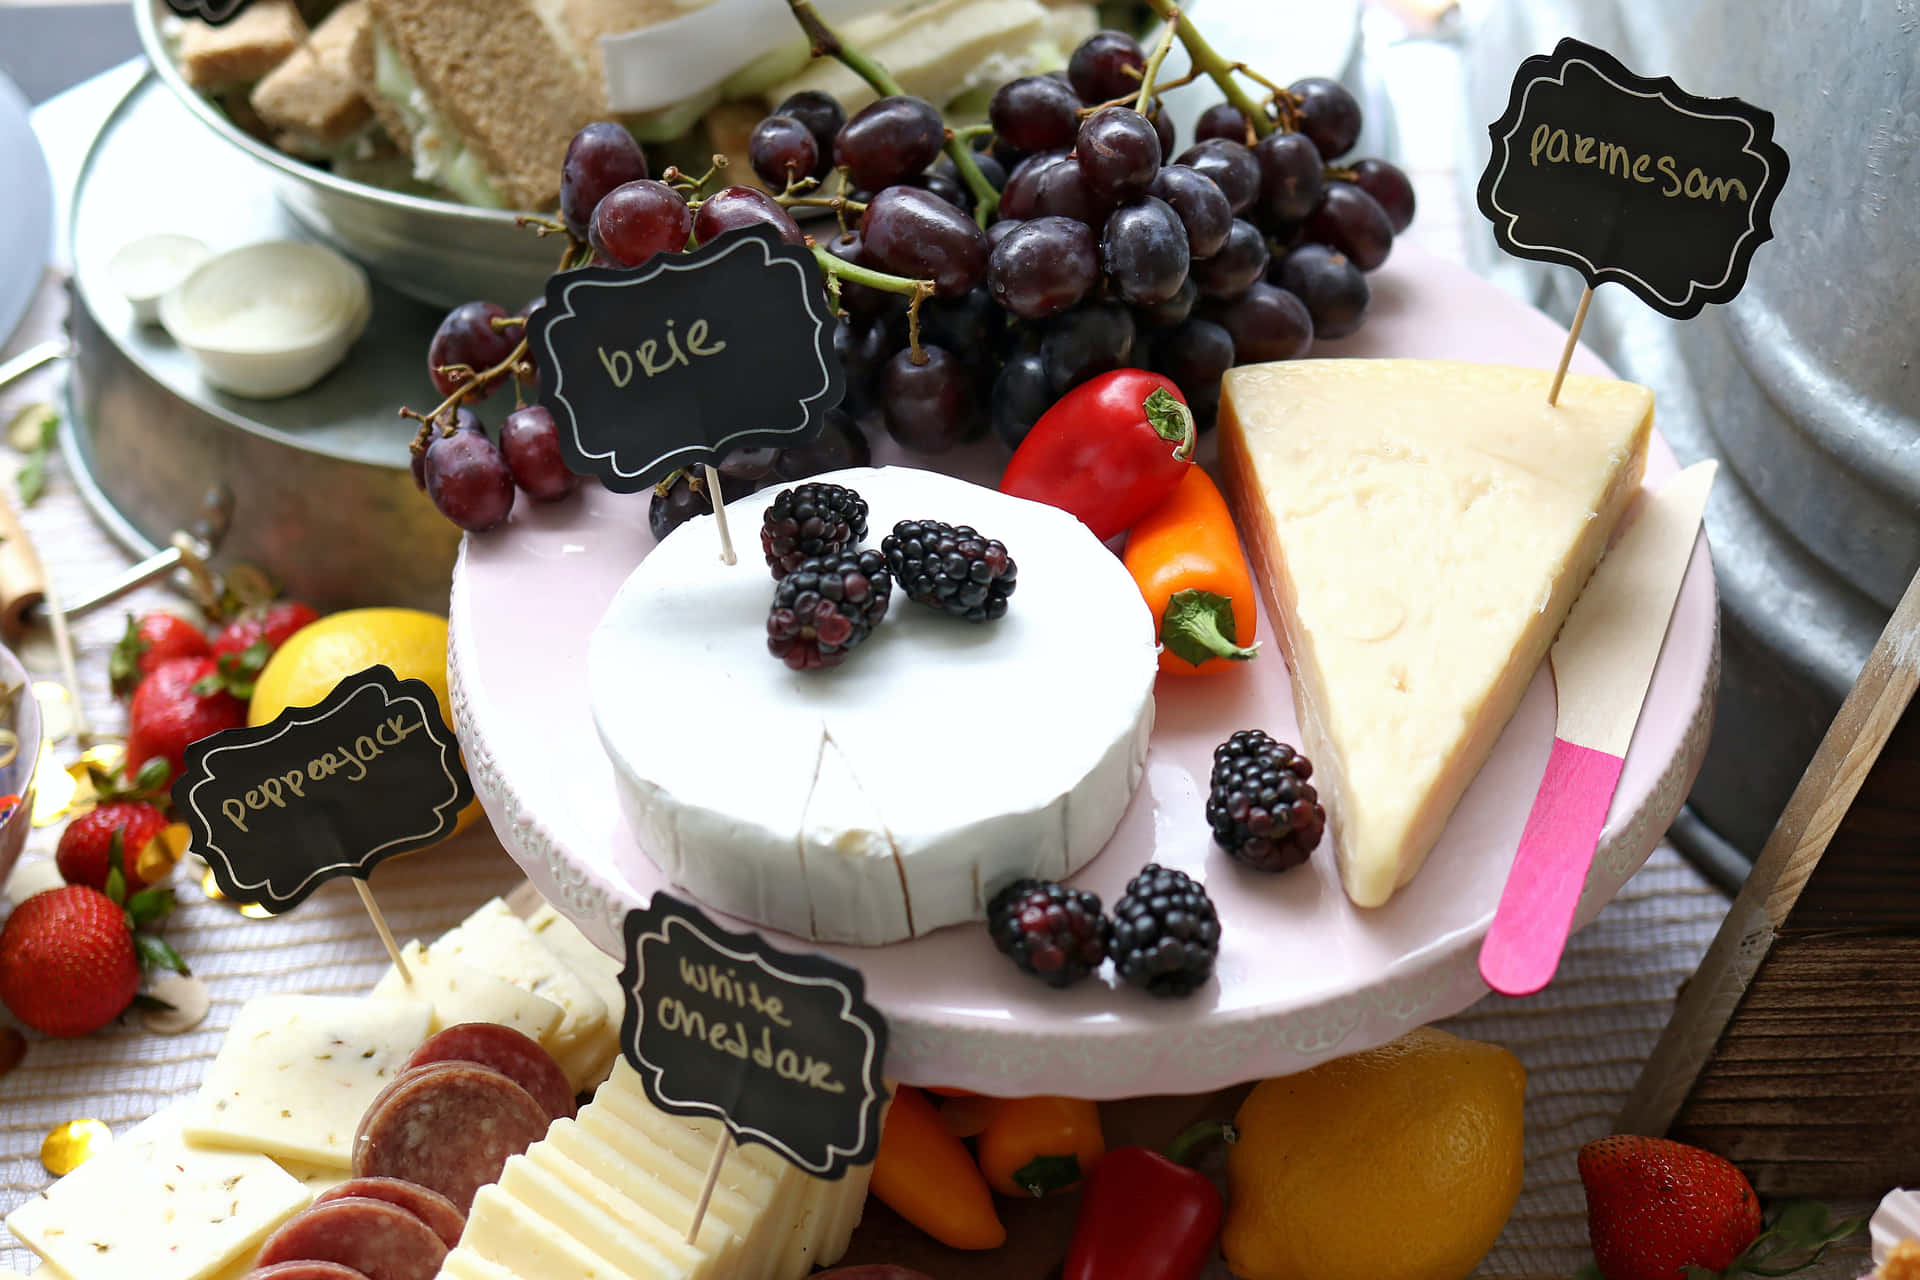 Assortment of various types of cheese on a wooden board